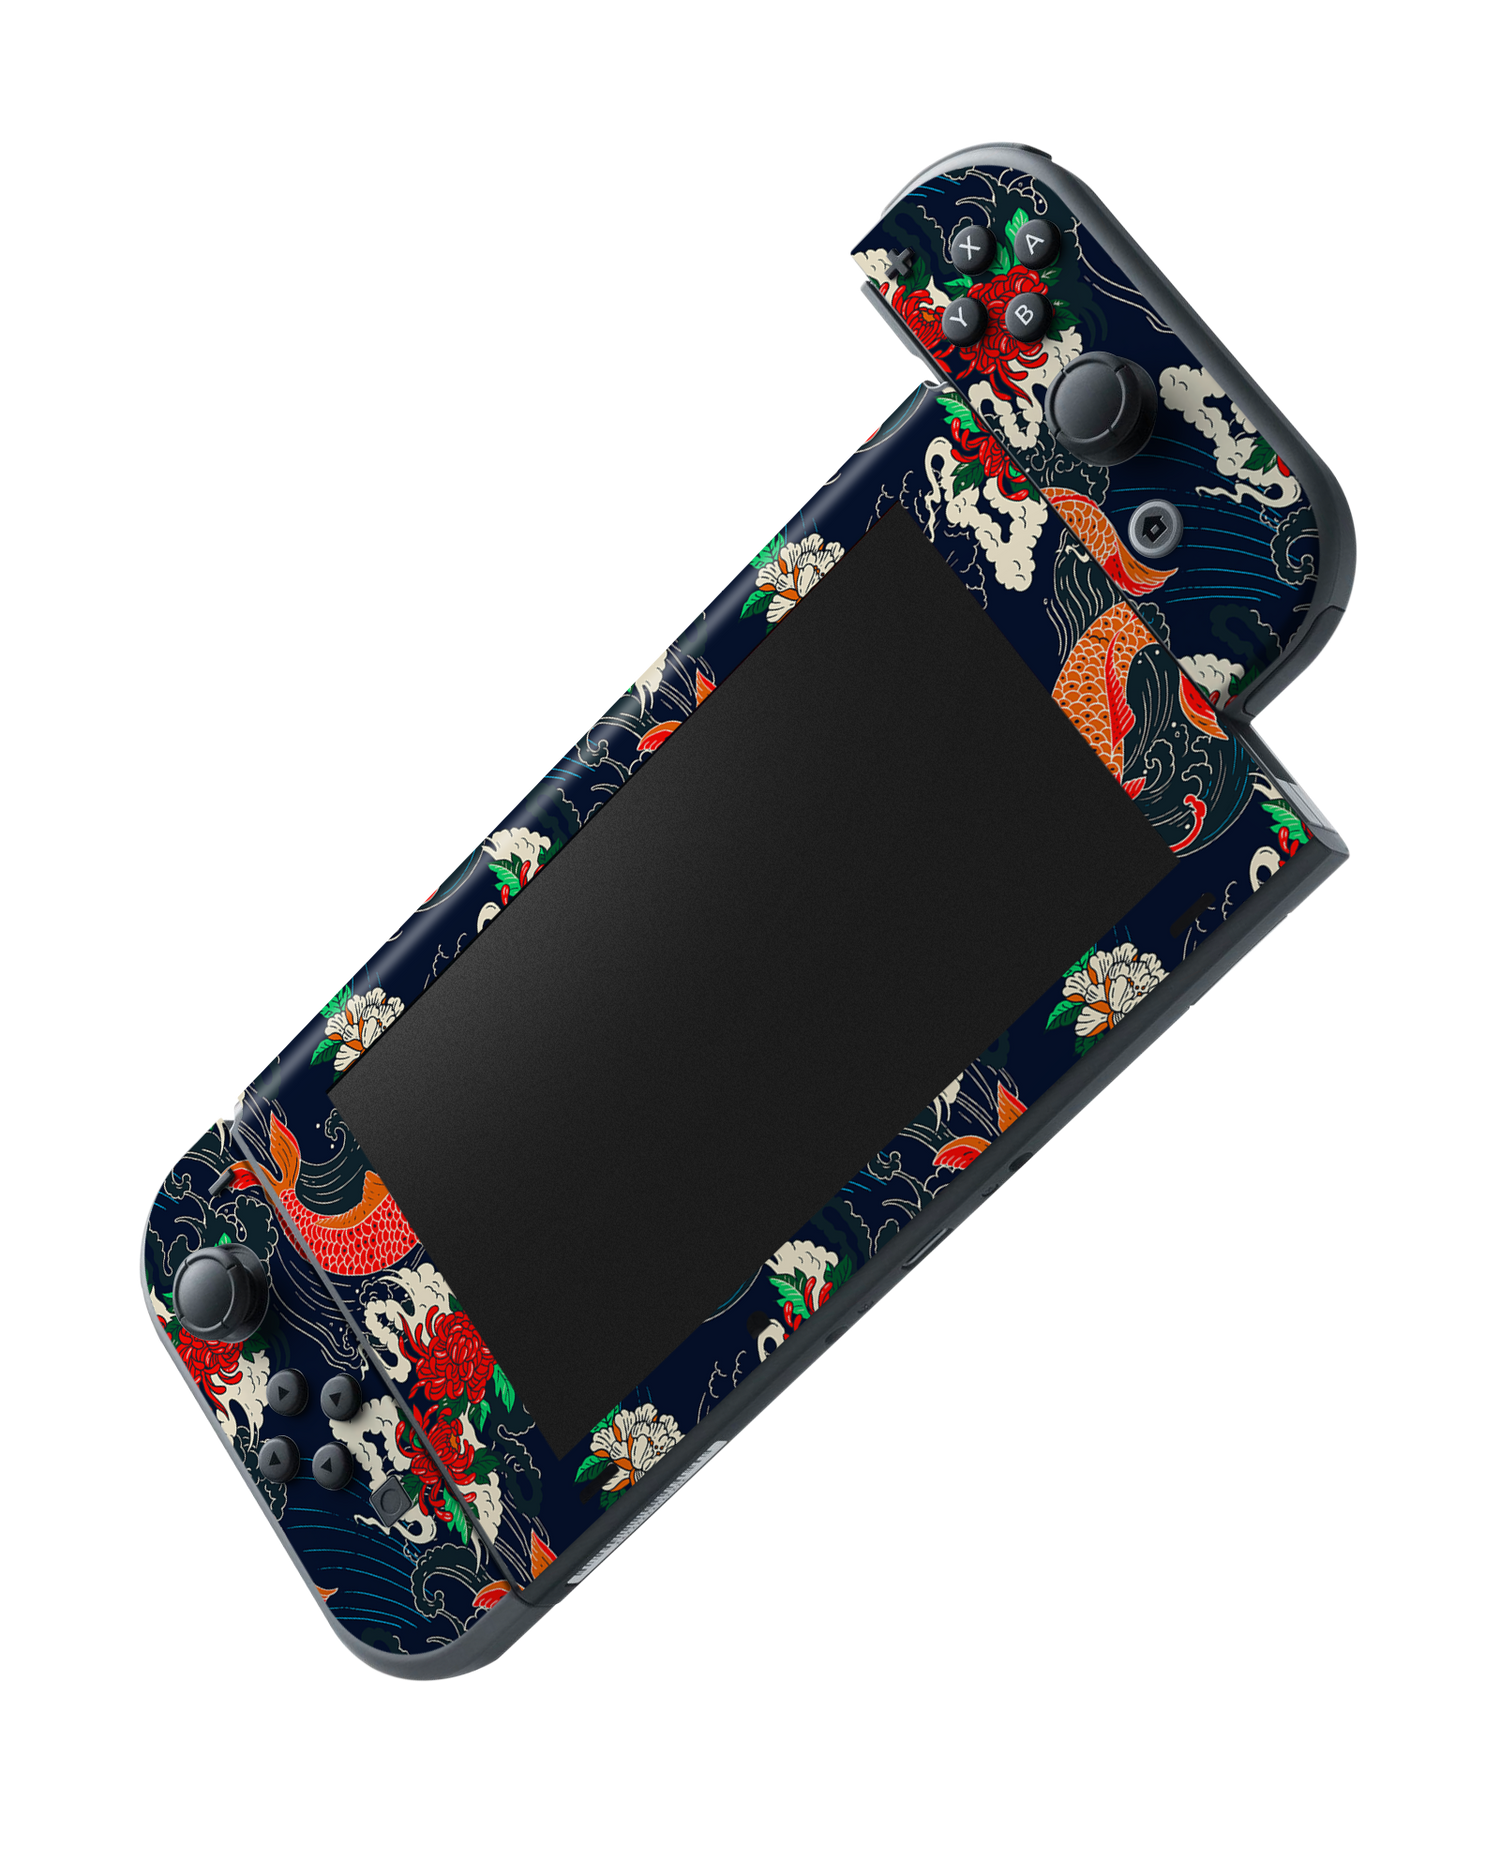 Repeating Koi Console Skin for Nintendo Switch: Joy-Con removing 